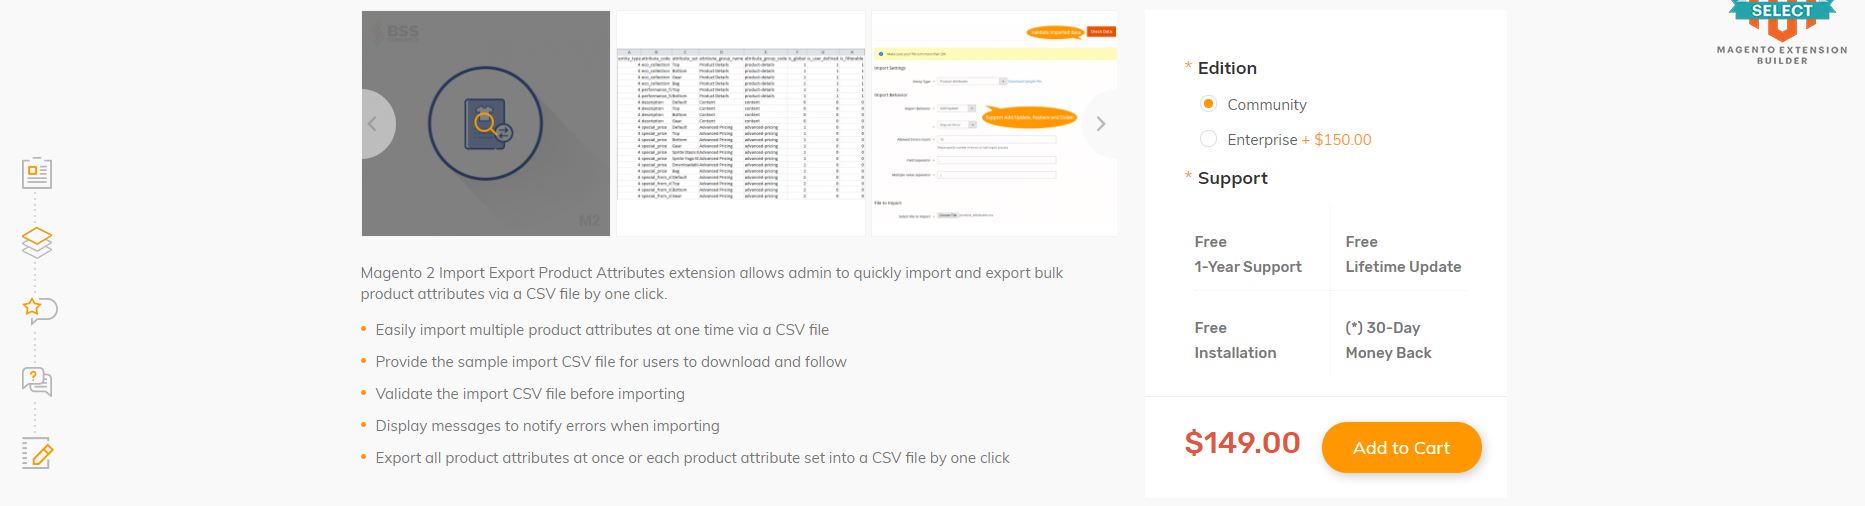 Magento import products extension